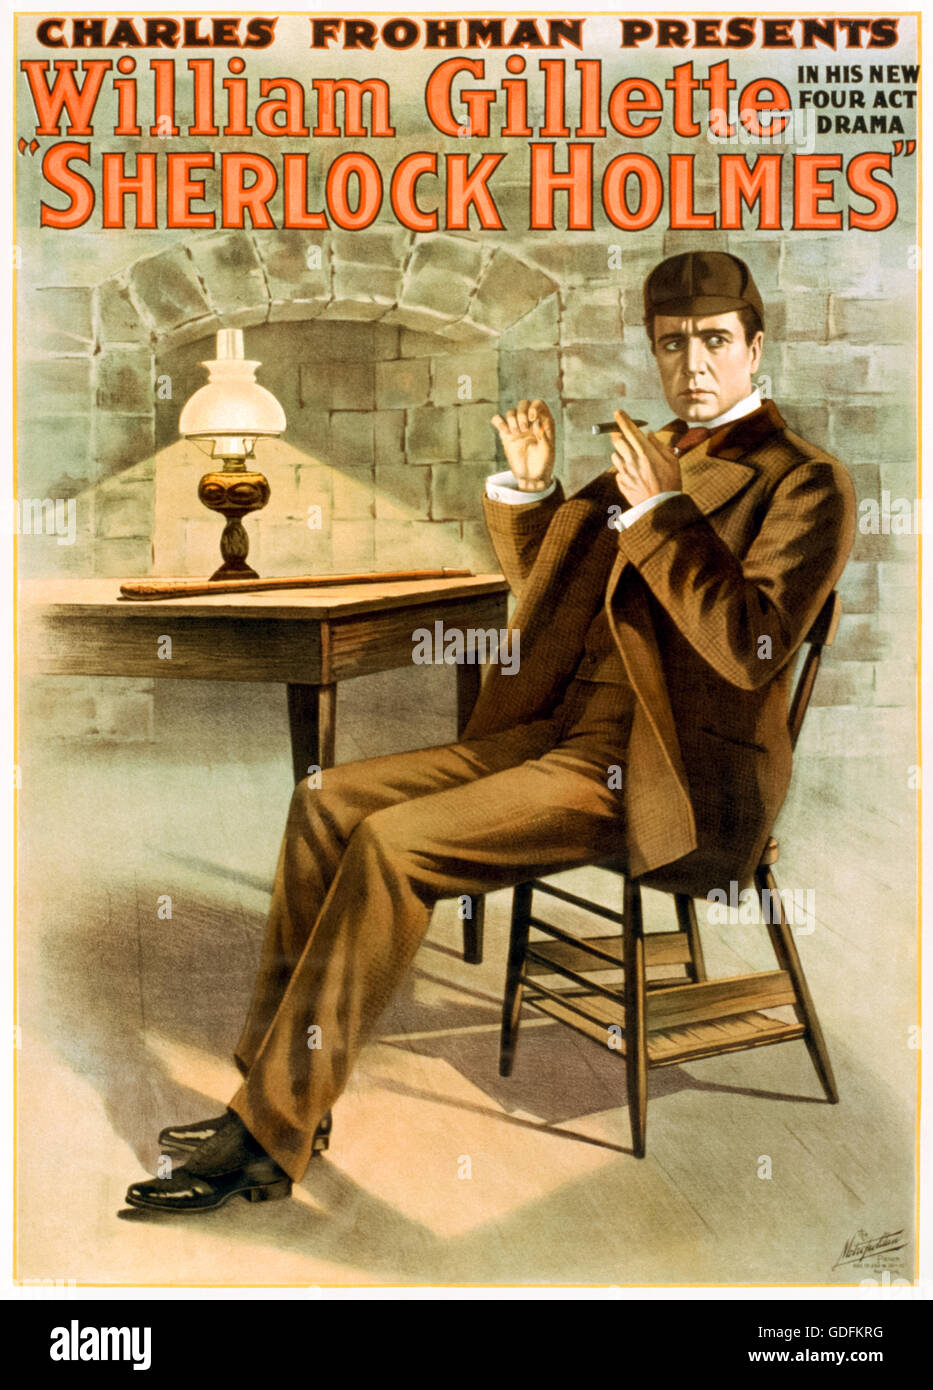 ‘Charles Frohman Presents William Gillette in his New Four Act Drama “Sherlock Holmes” Theatre poster, Garrick Theatre, New York City, 1900. Stage adaptation of the famous detective stories by Sir Arthur Conan Doyle. Photograph of original theatrical poster. Stock Photo